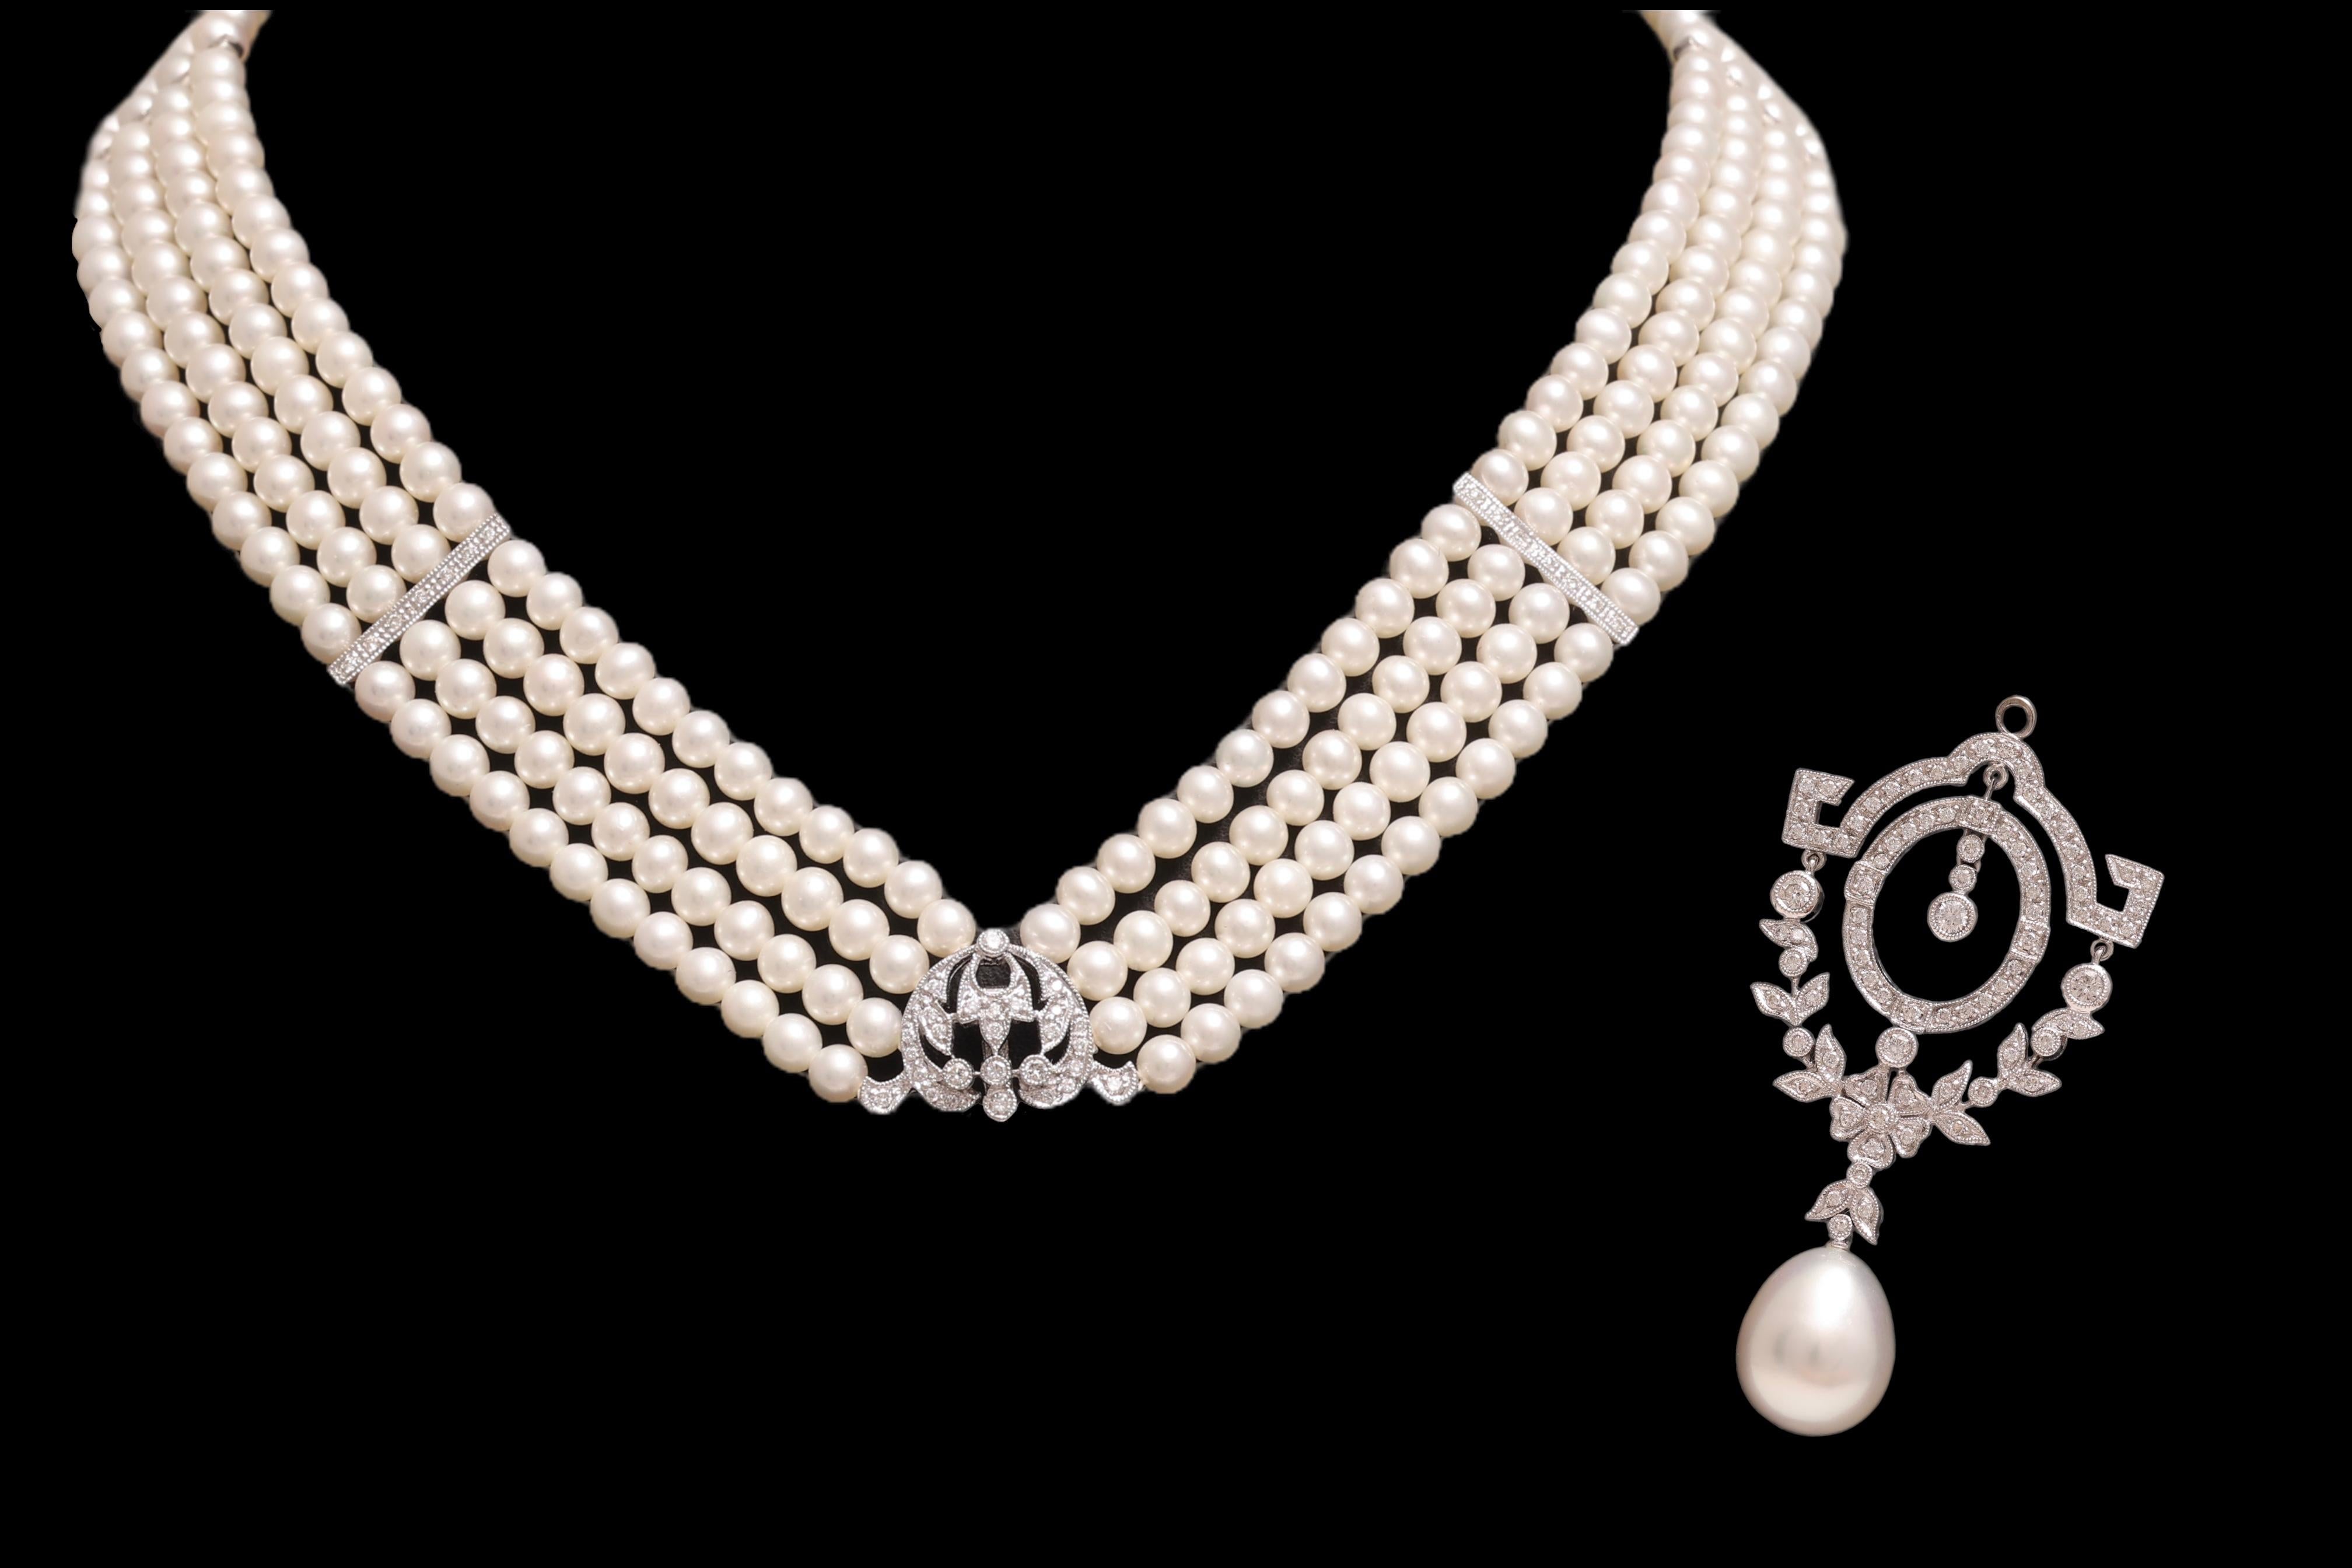 Magnificent, Eye Catching 18 kt. White Gold Pearl Necklace With Large South Sea Pearl, Diamonds 

Pearls: 4 rows of fresh water pearls approx. 4 mm each, together 344 pearls
1 Large Australian south sea pearl approx. 14.35 mm x 12.1 mm

Diamonds: